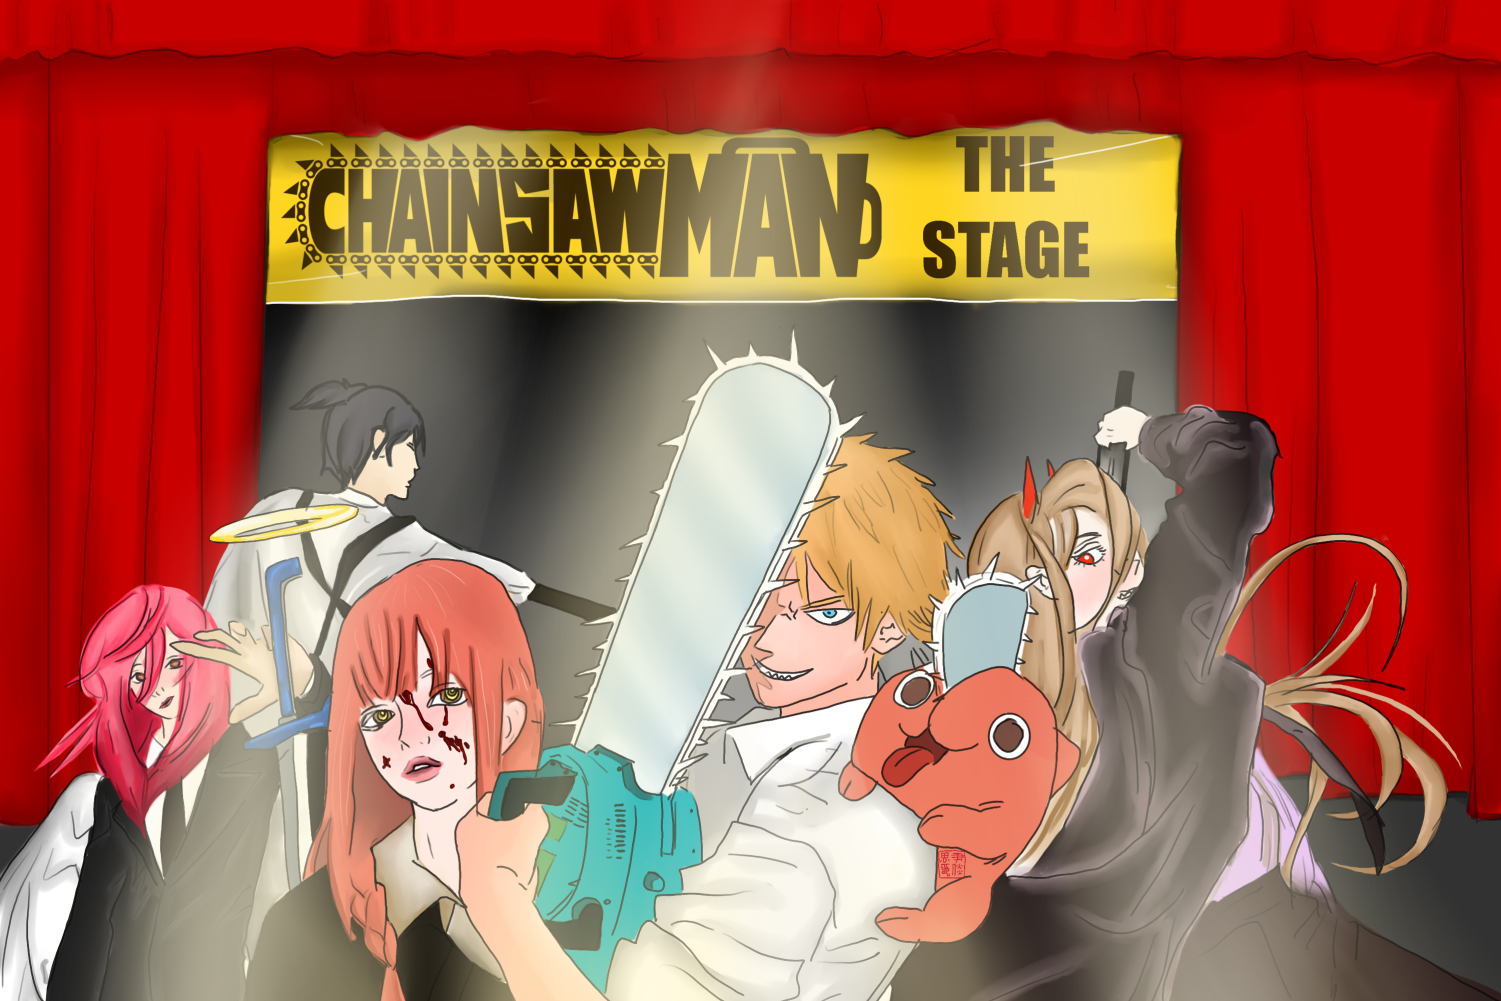 Chainsaw Man the stage